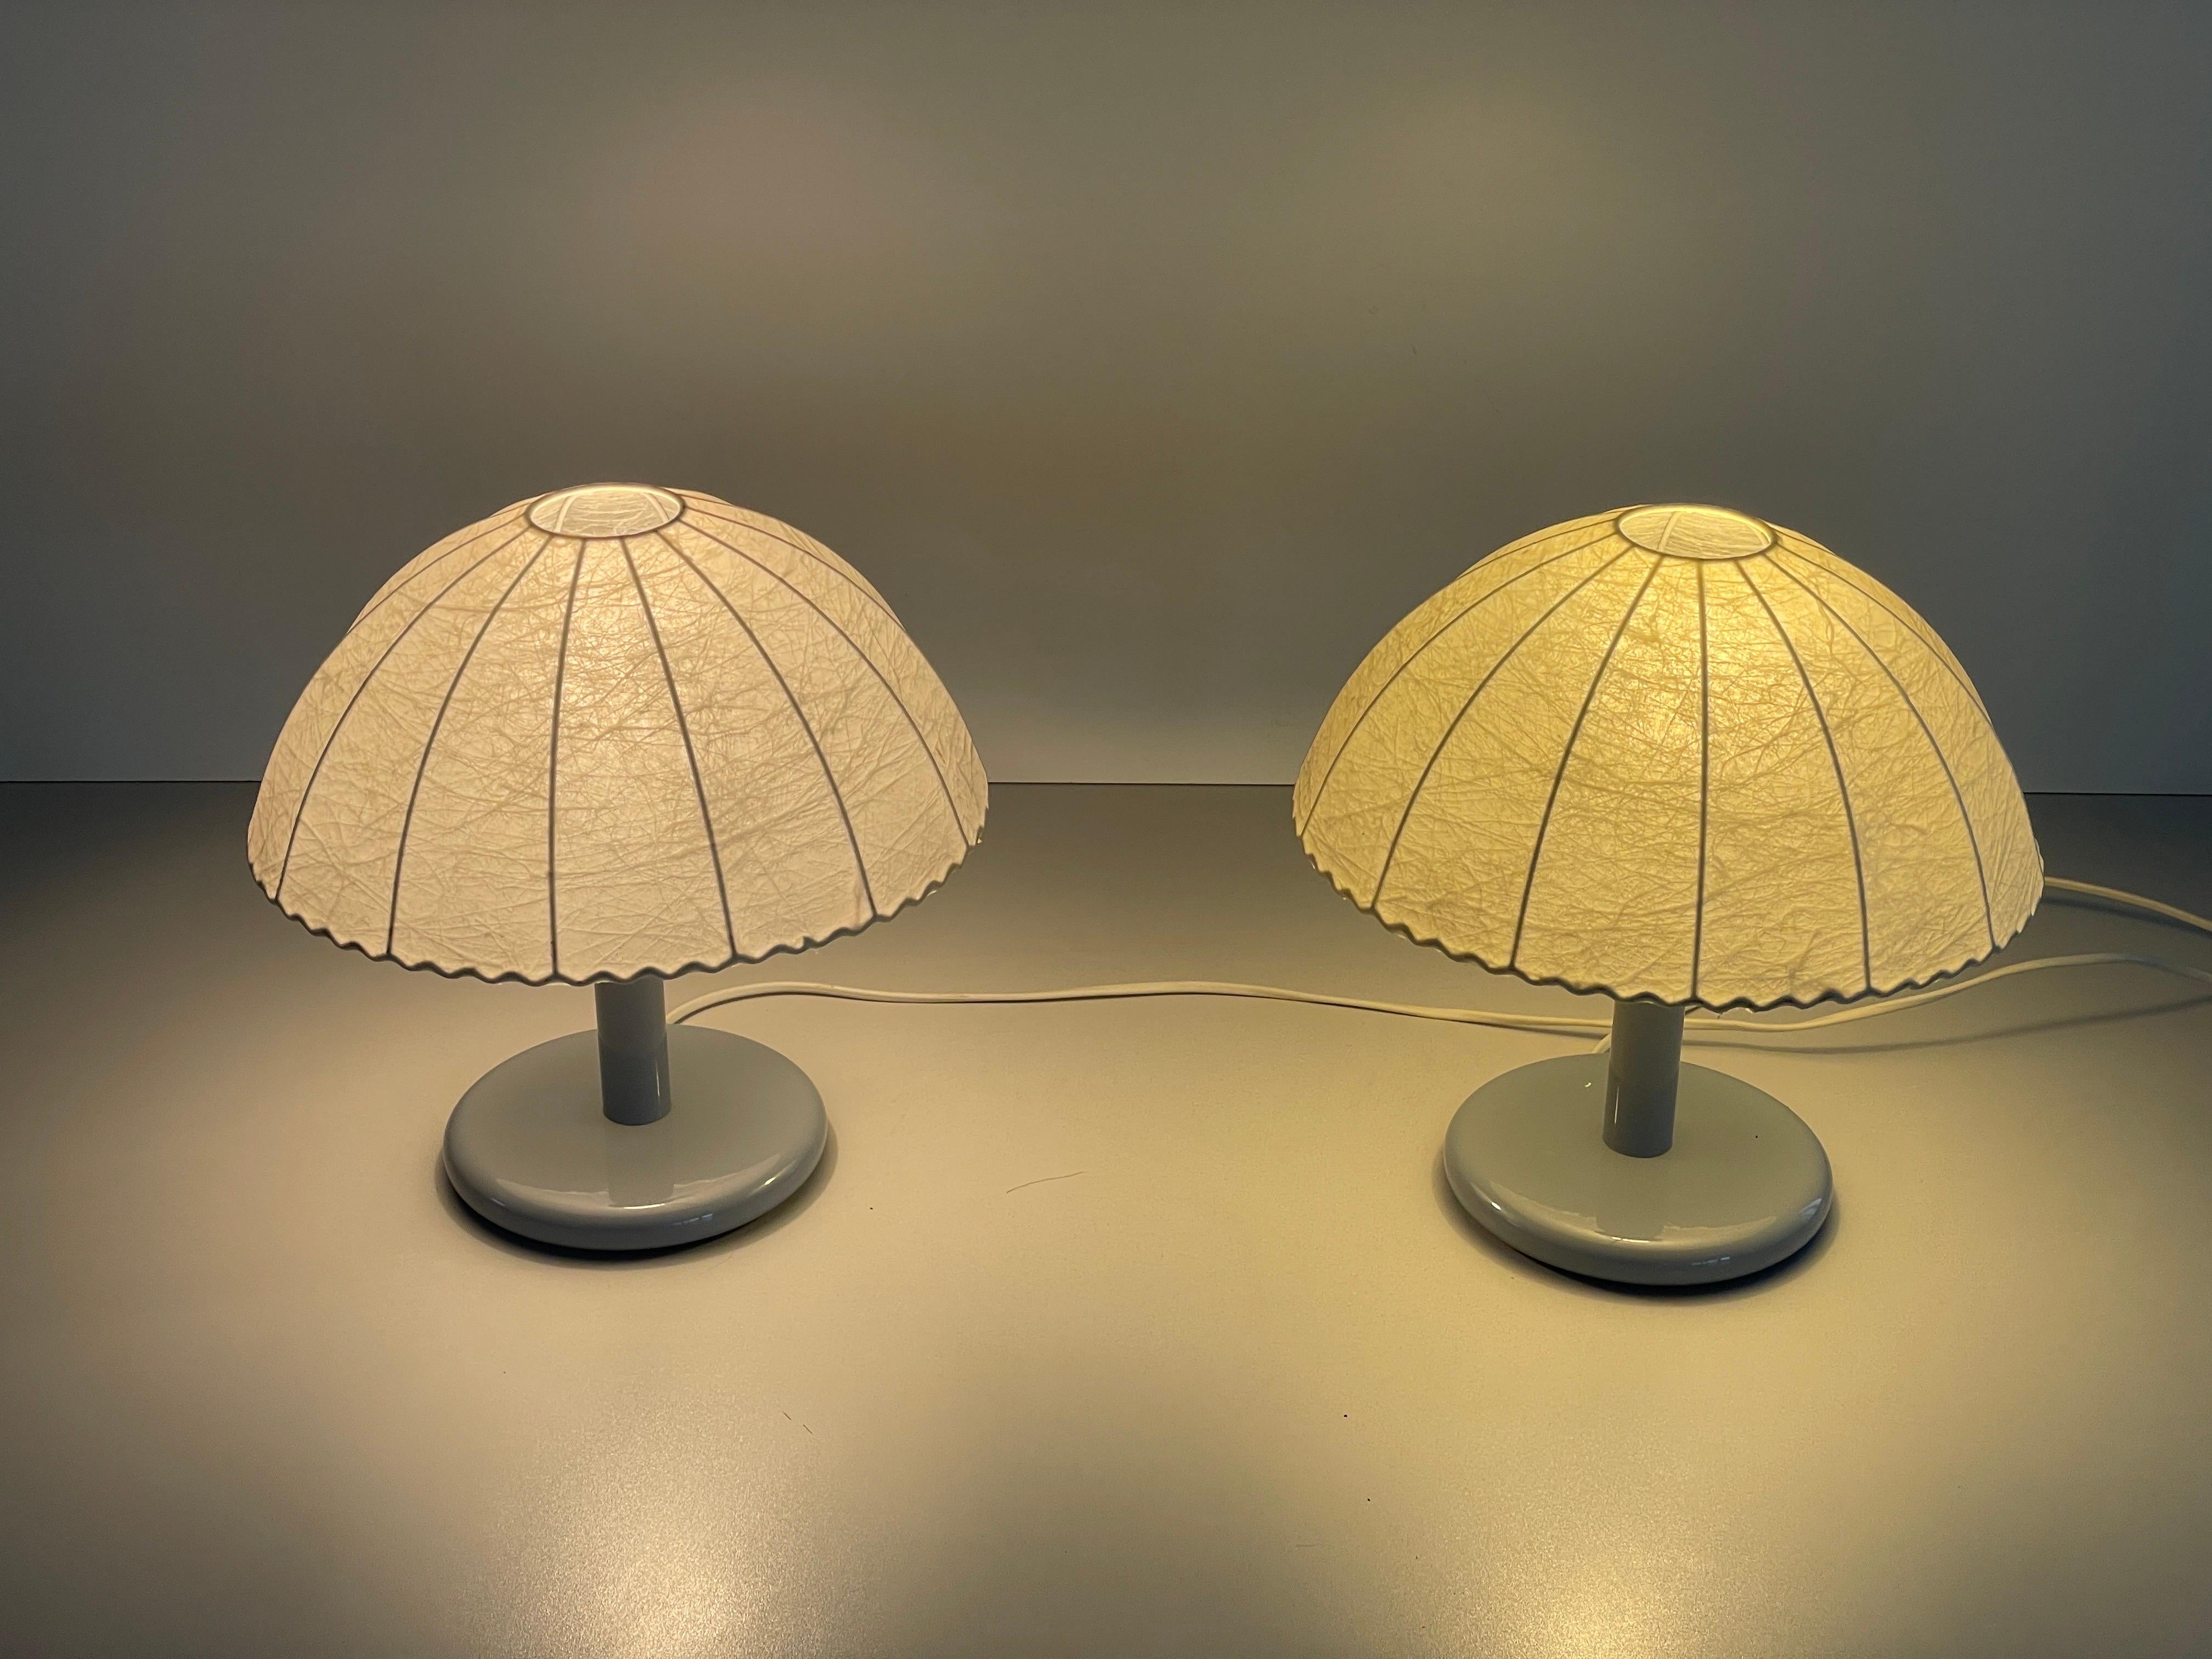 Pair of Cocoon Table Lamps with Grey Metal Base by GOLDKANT, 1960s, Germany For Sale 7